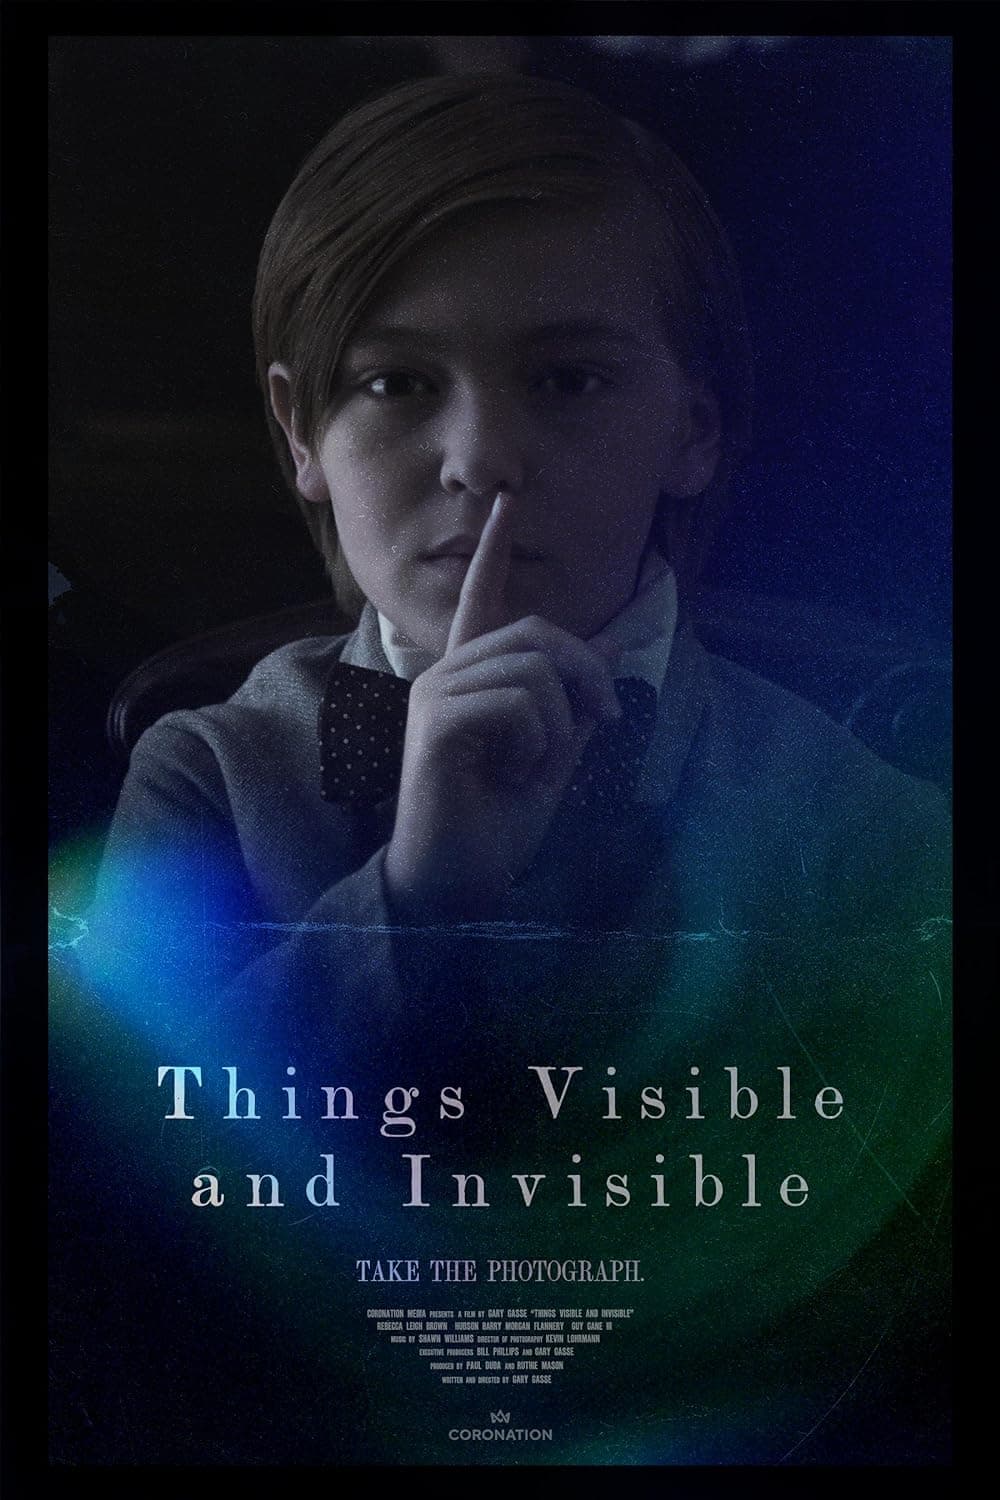 Things Visible and Invisible